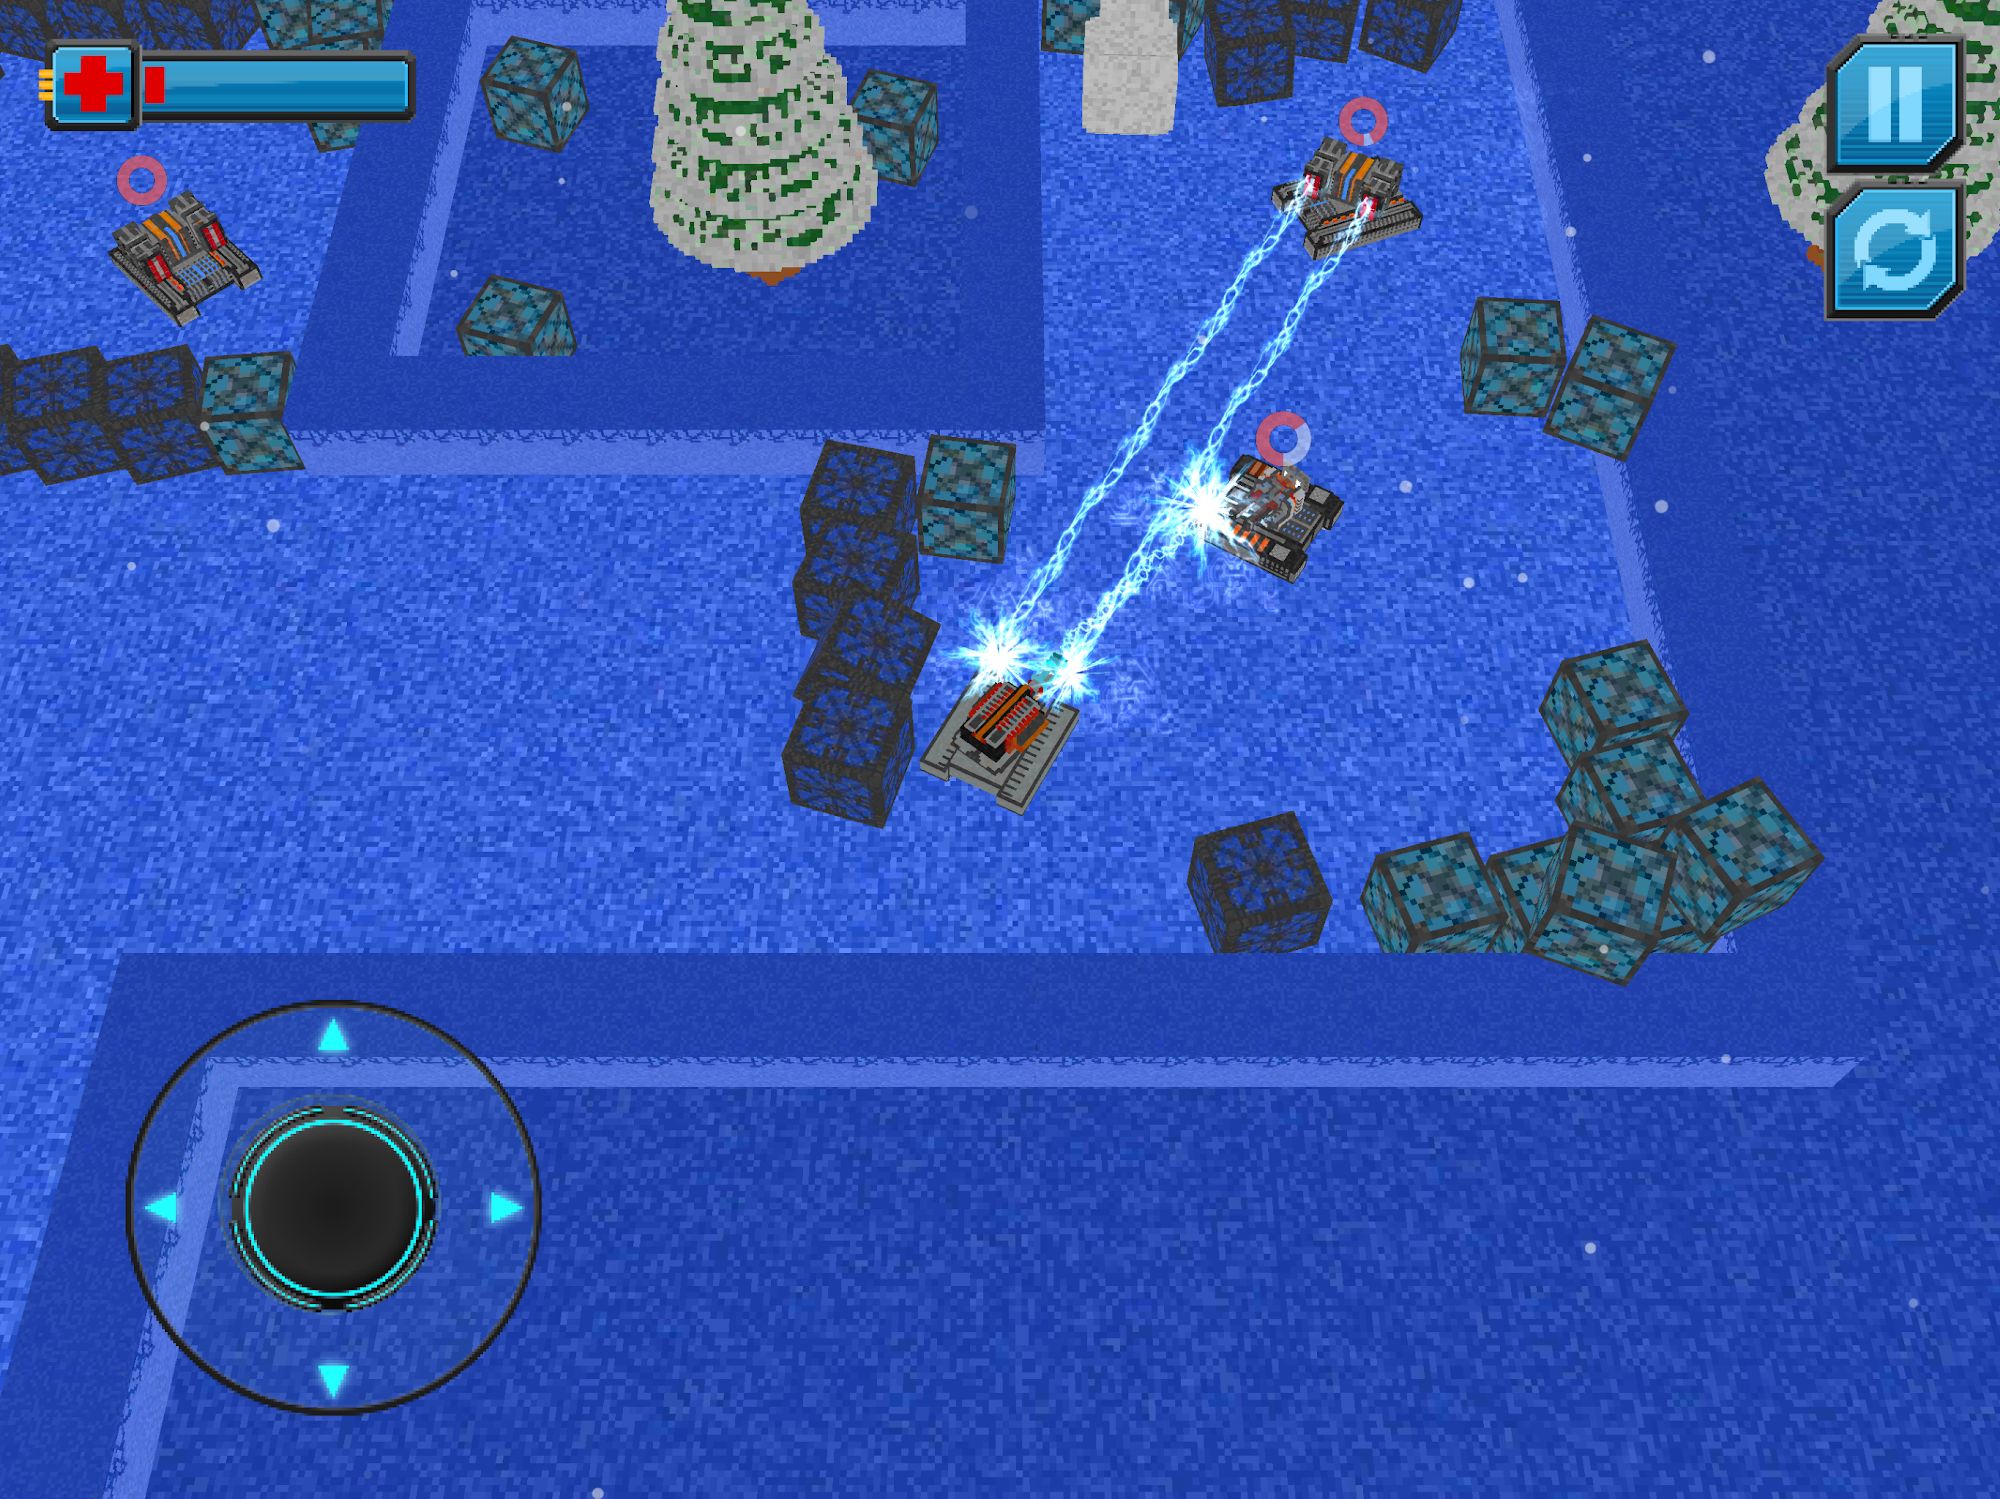 Power Tanks 3D - Cyberpunk Shooter War Game for Android